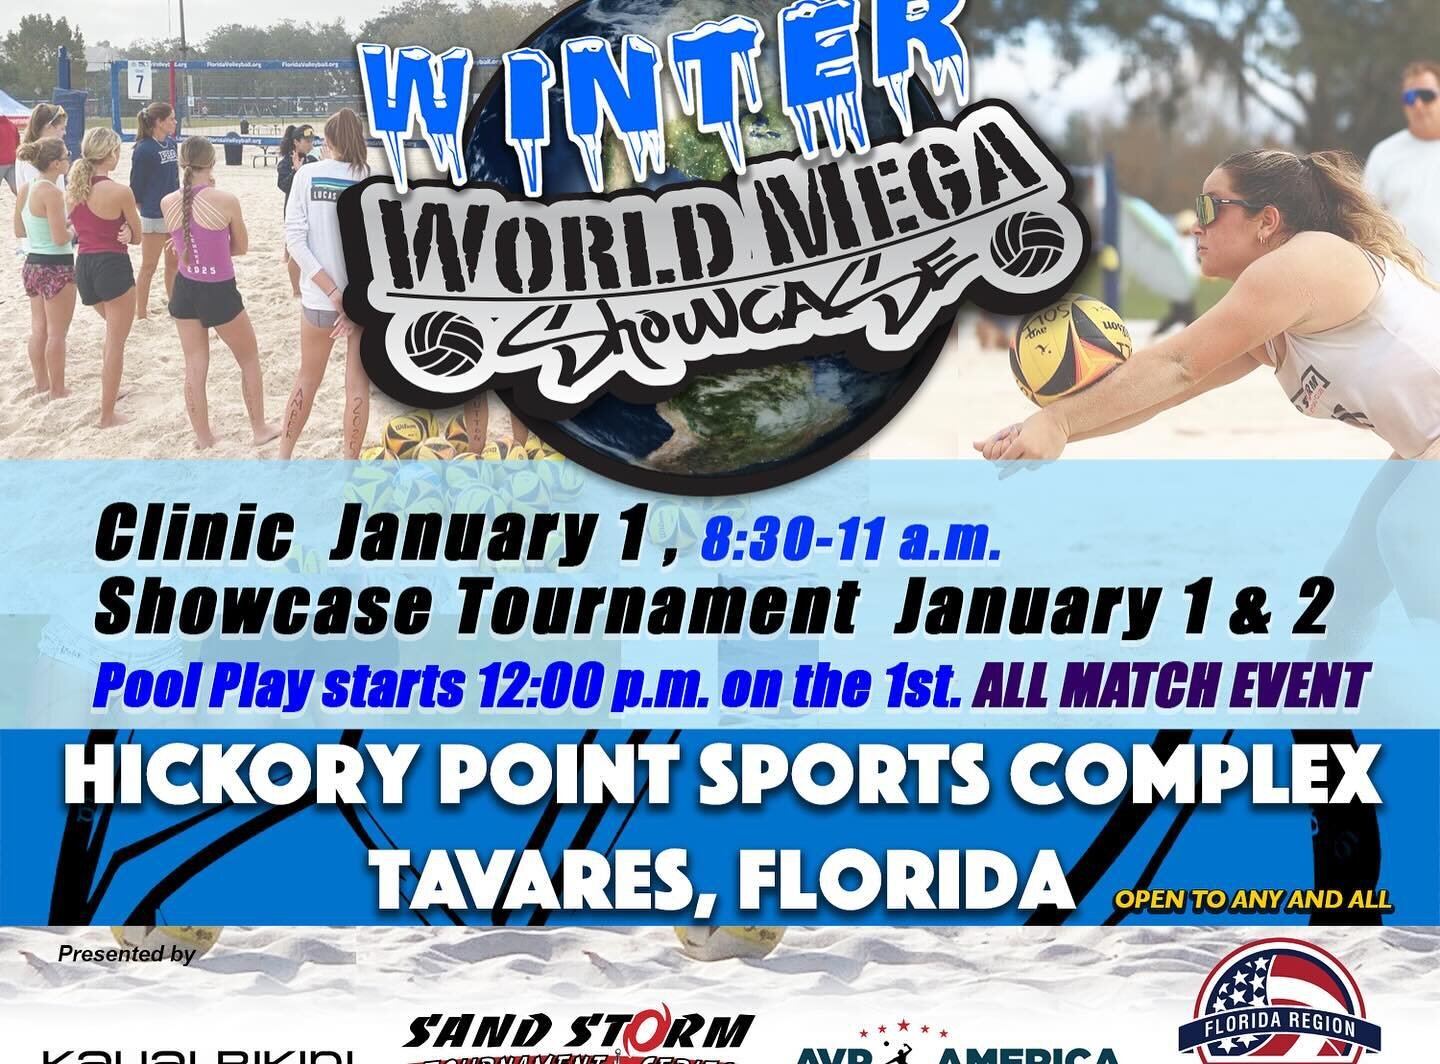 In Less then two weeks when the dead period ends - Winter World Mega 6 
Join us for this match play event !